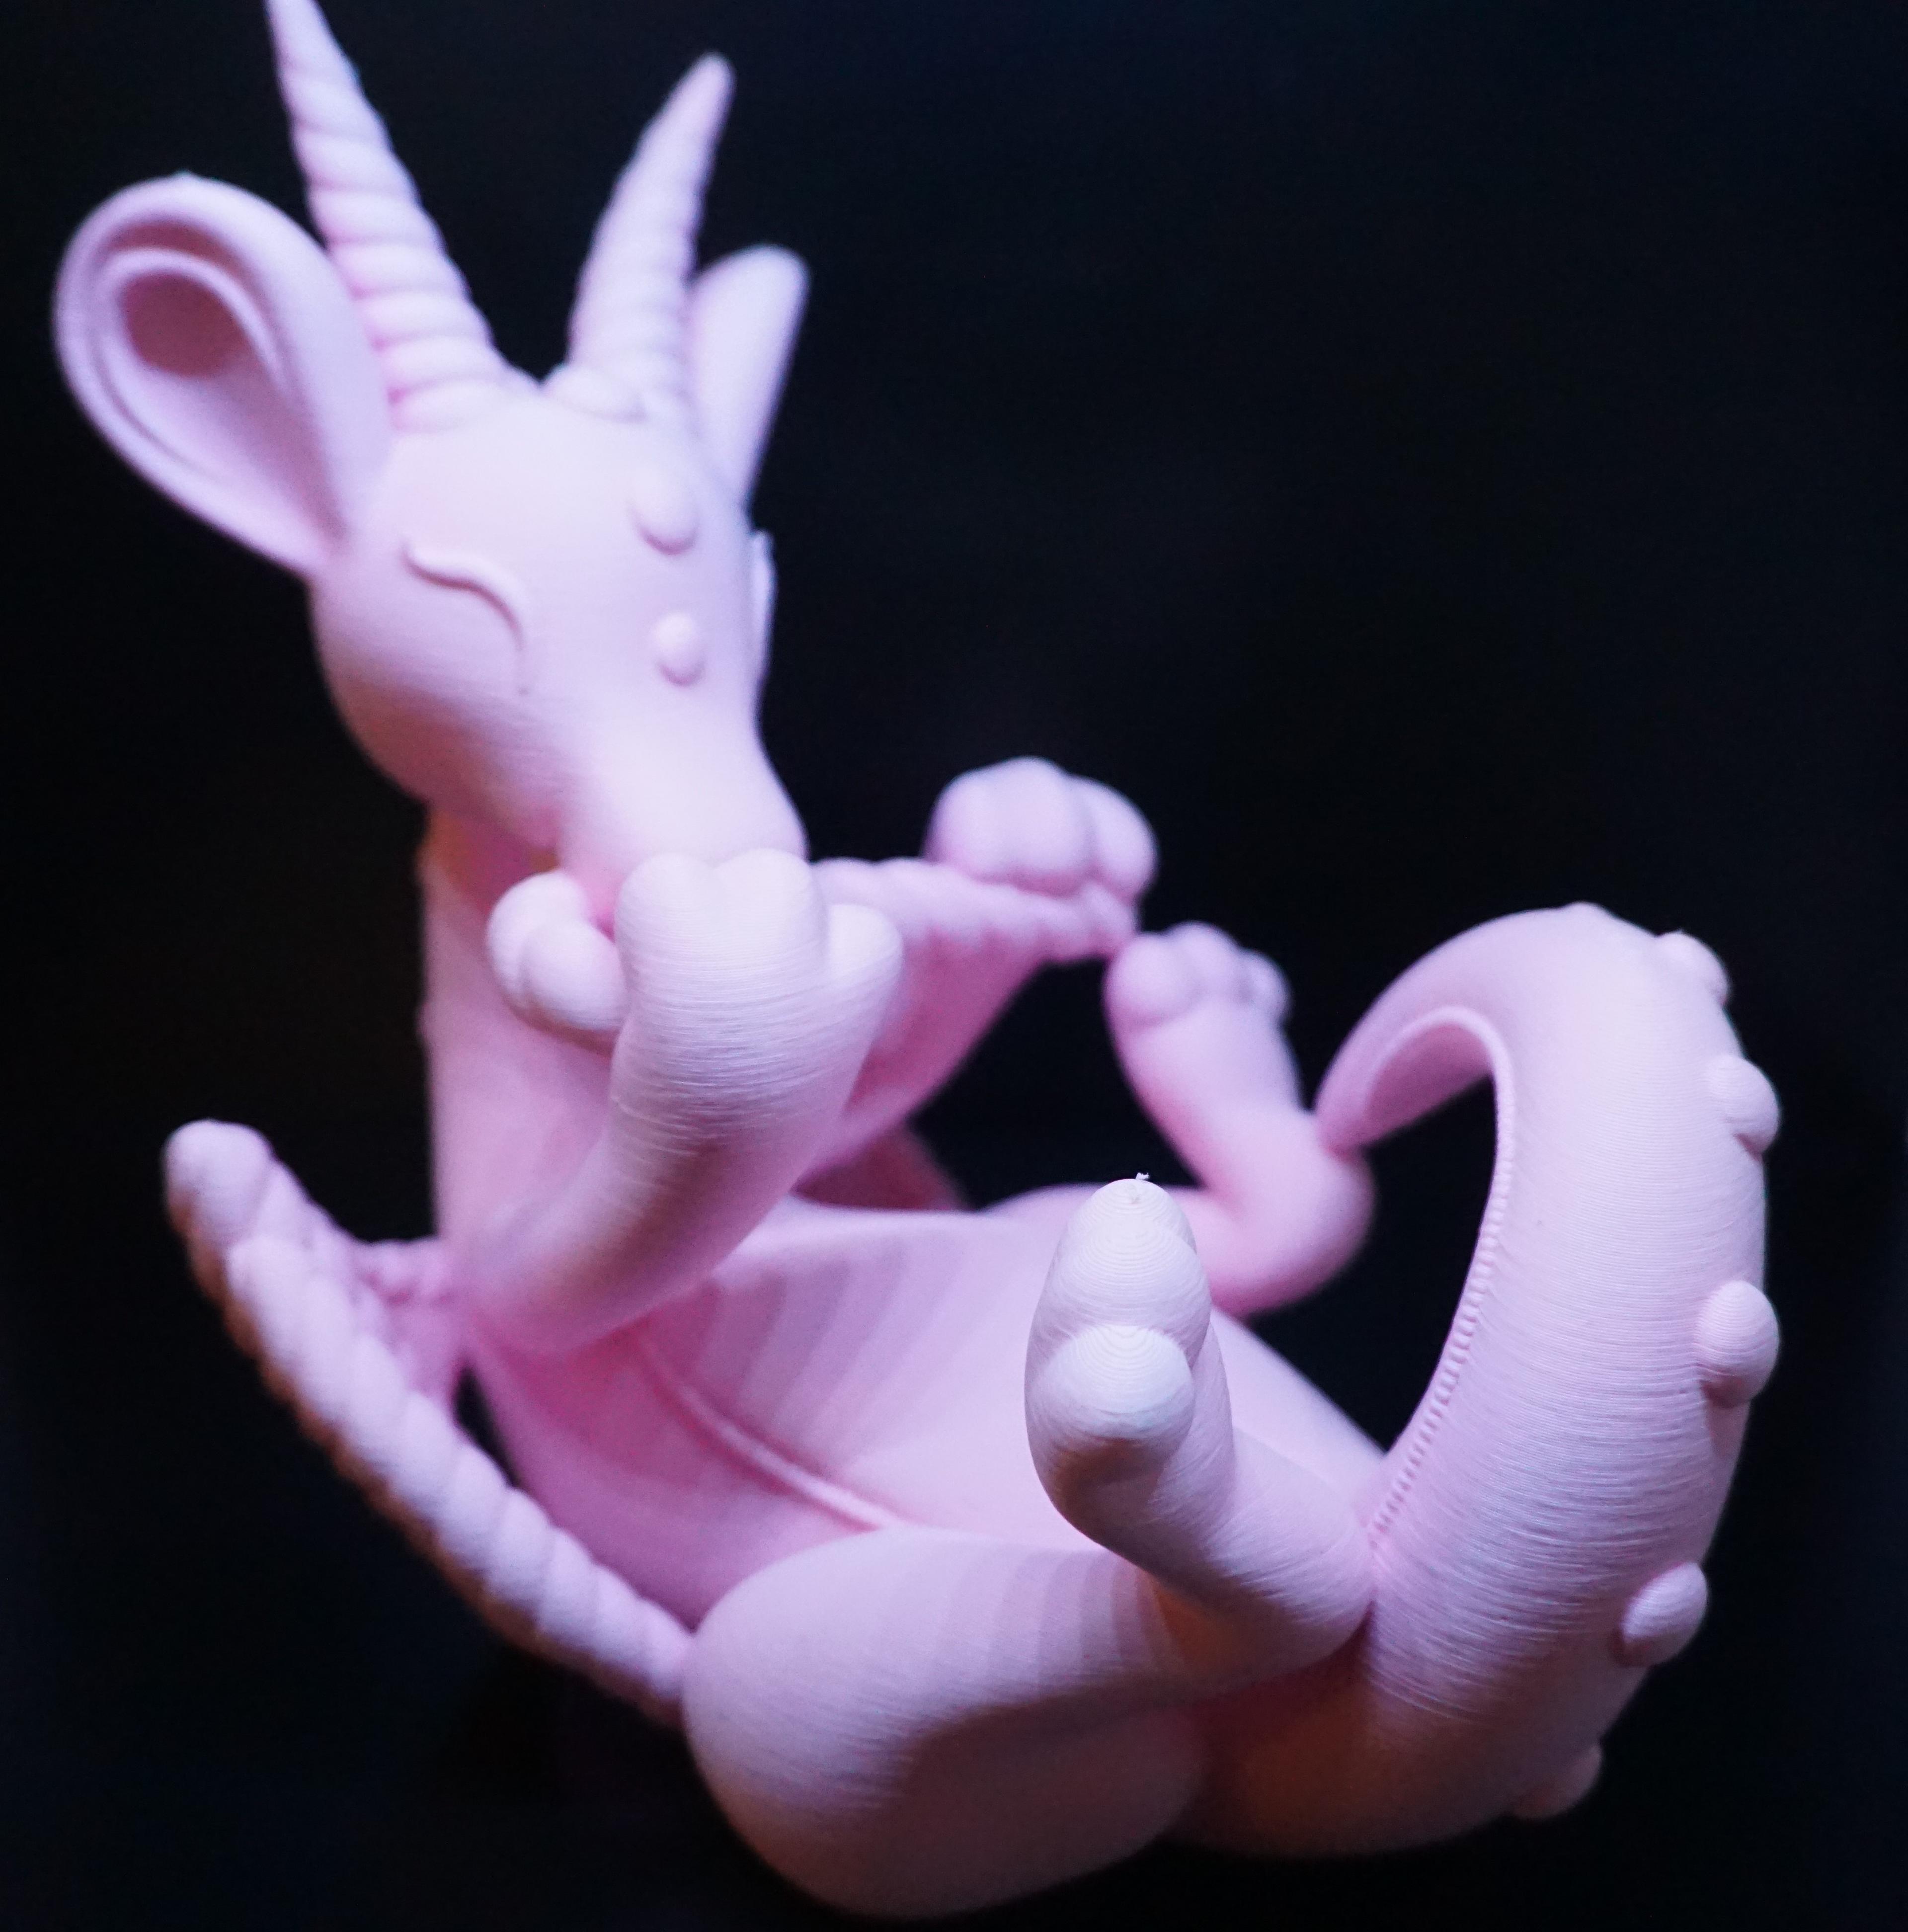 Pepper The Baby Dragon - Love it! Printed at 125% - 3d model